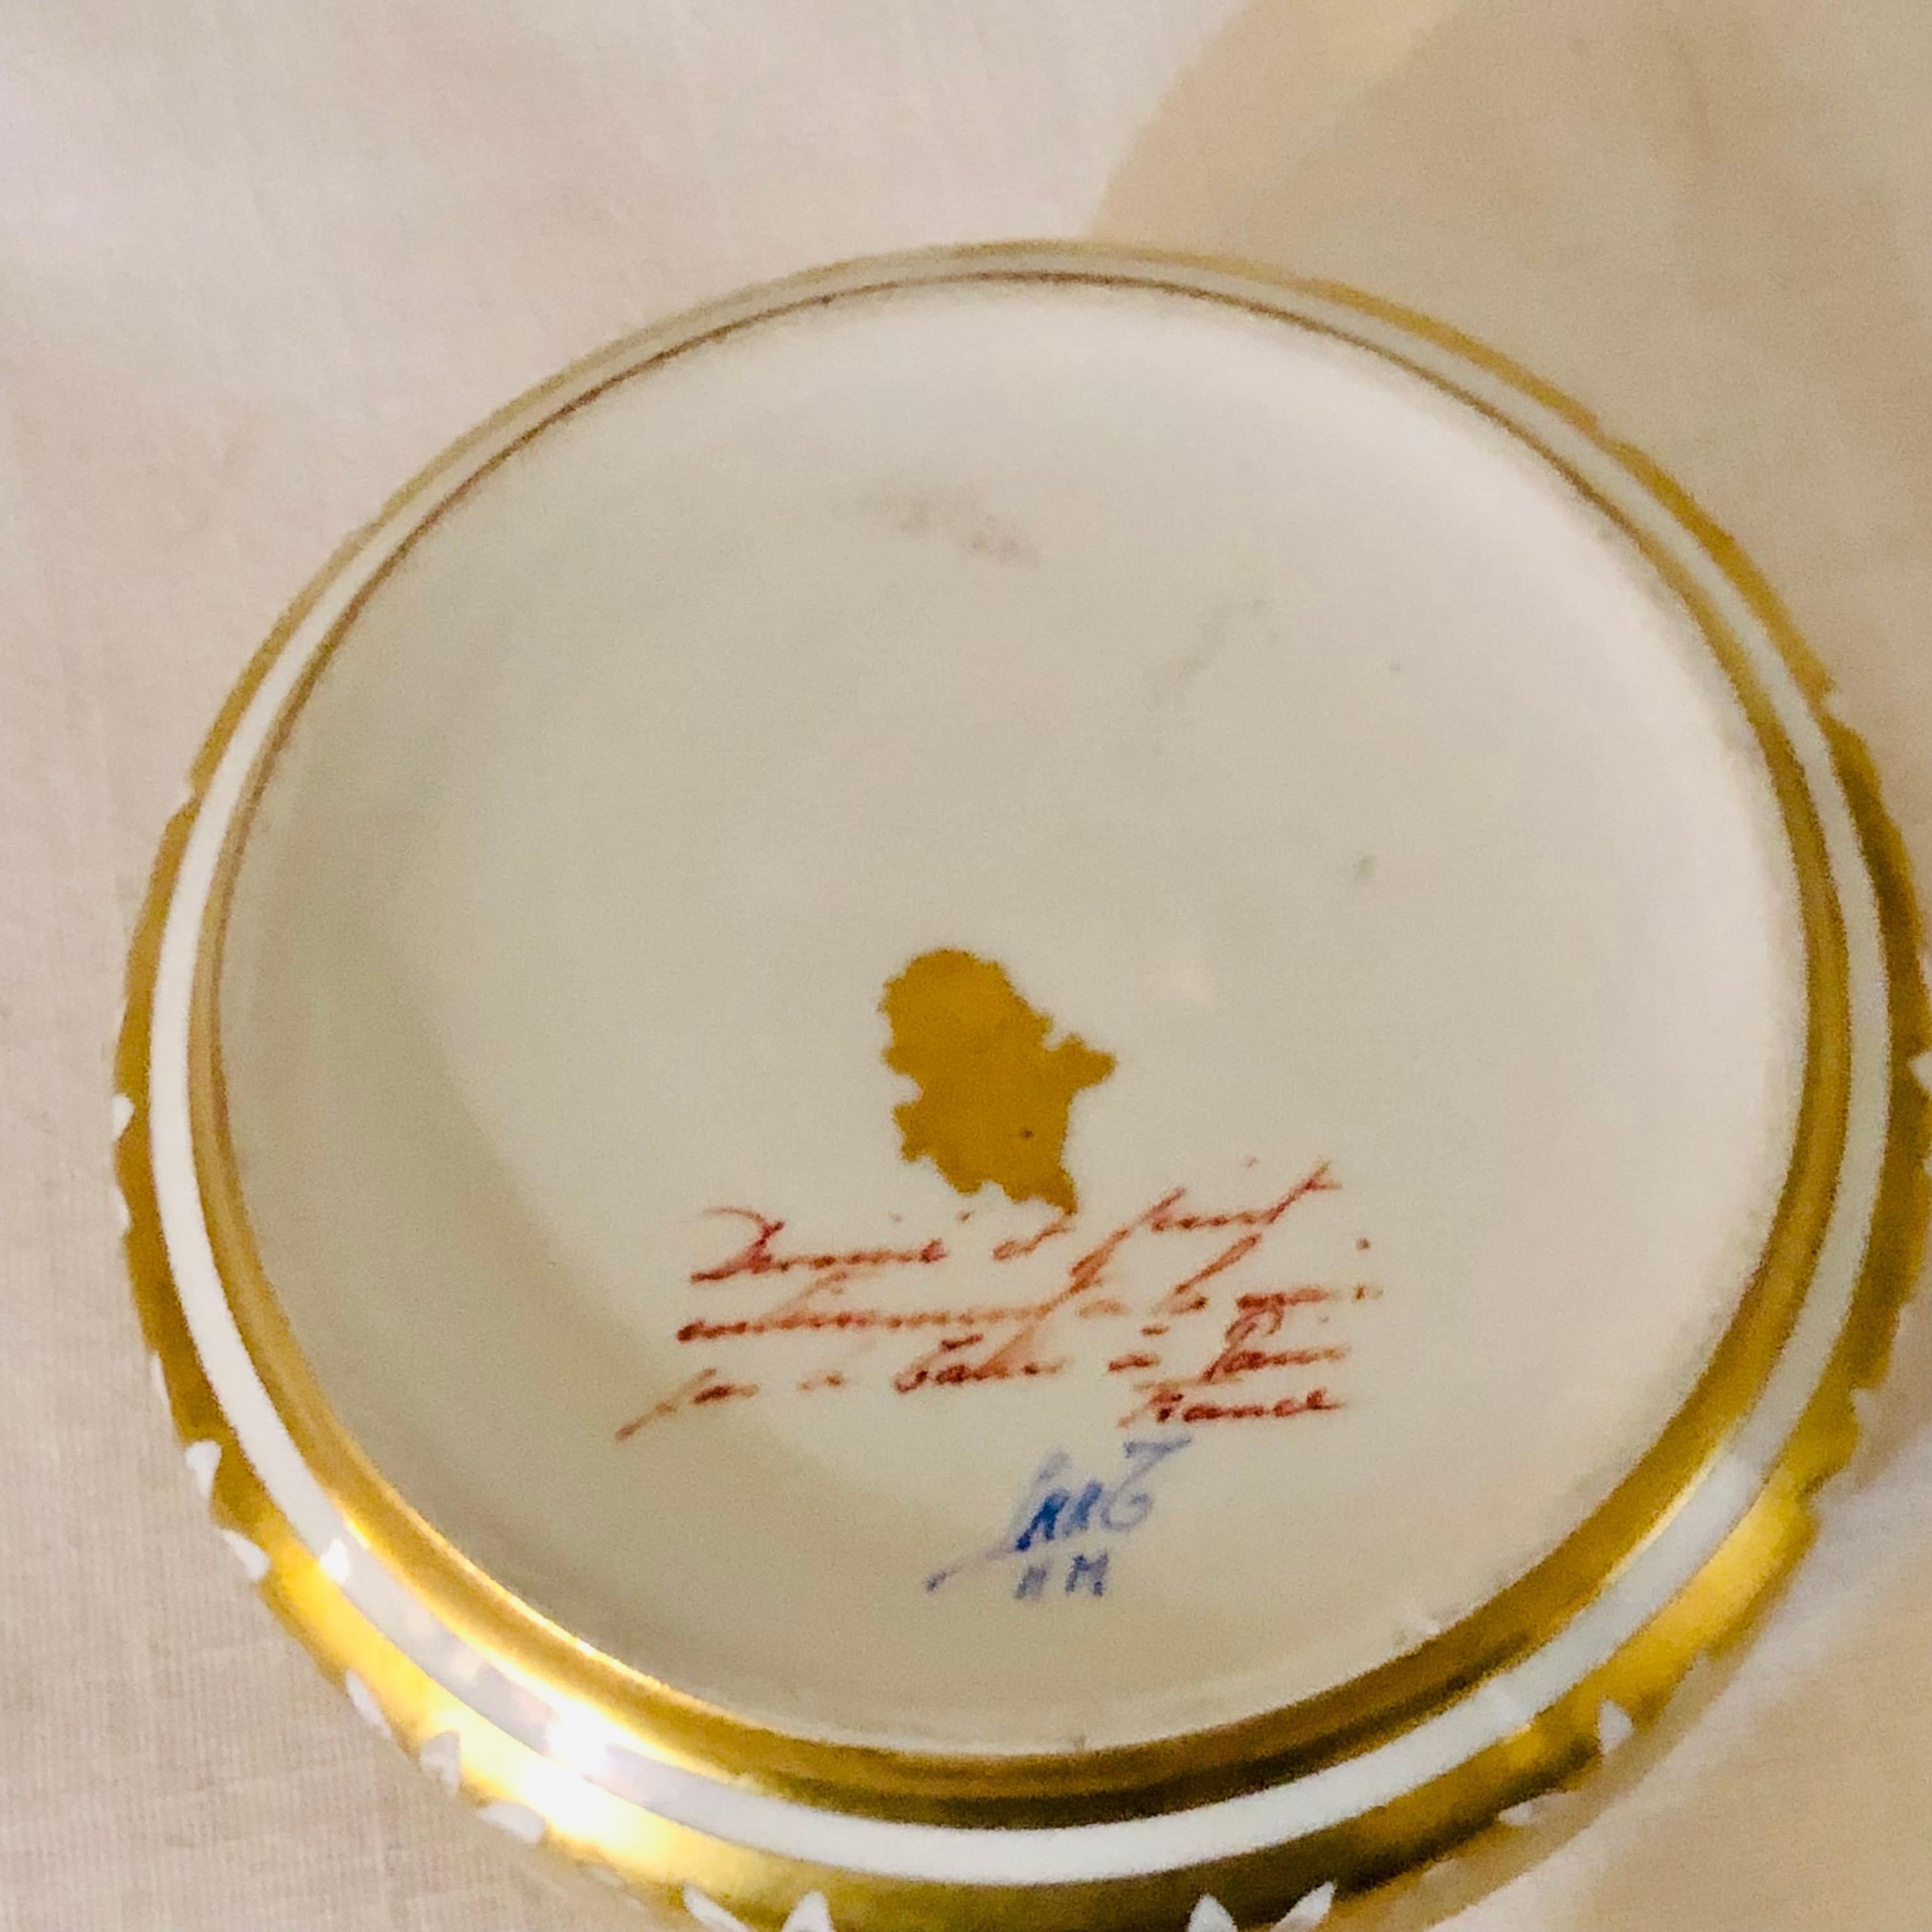 Le Tallec Porcelain Box with Gold Painted Decoration on a White Porcelain Ground 1